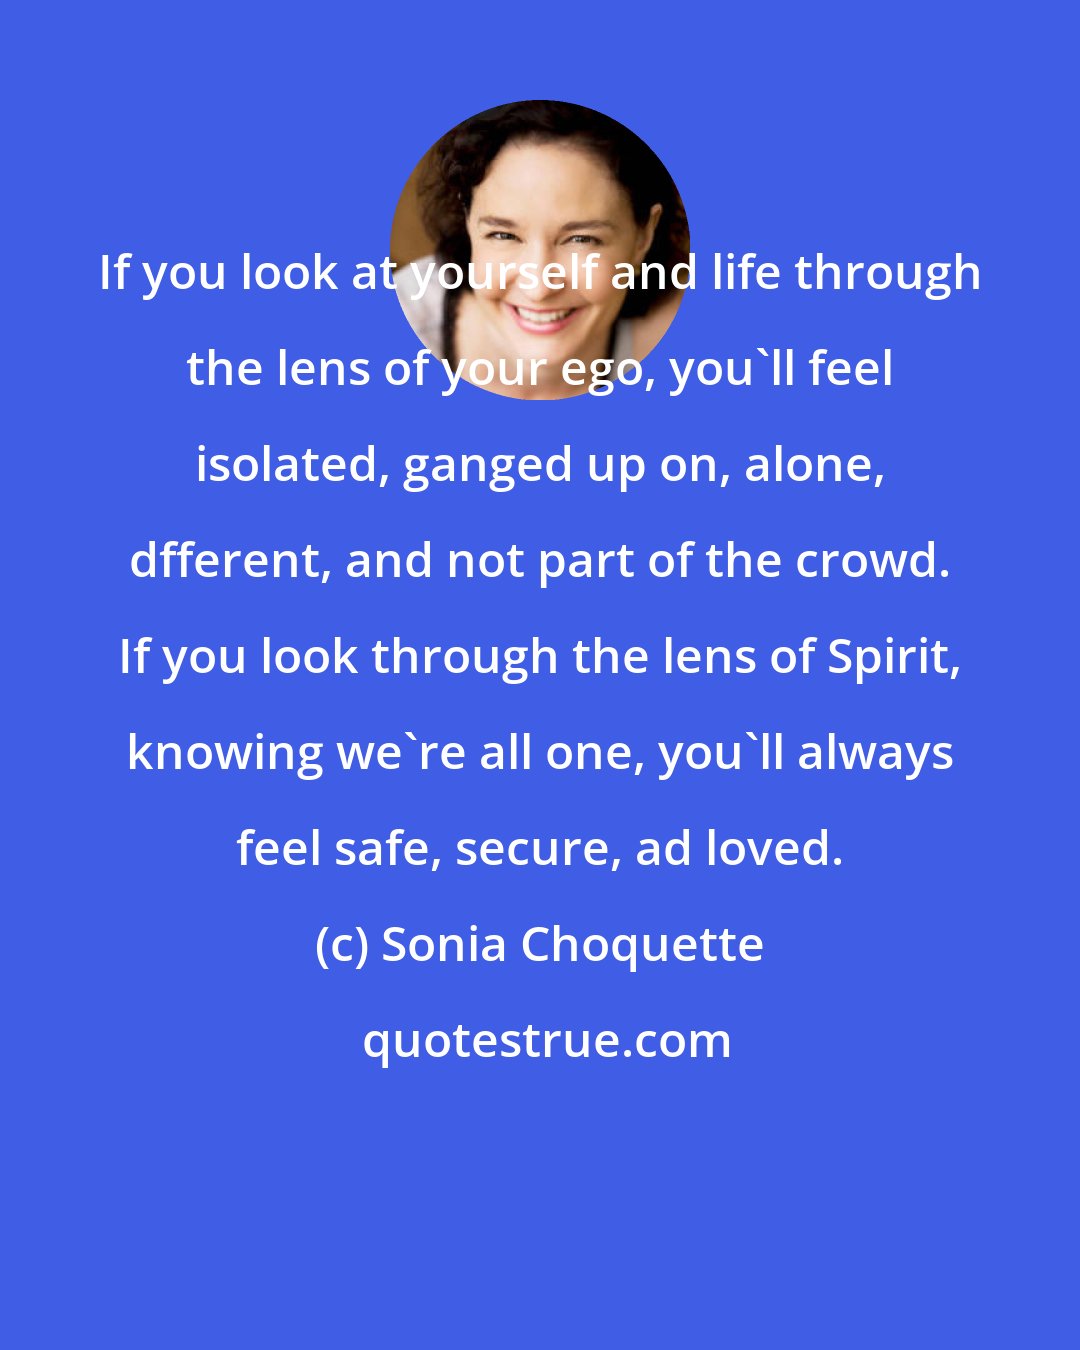 Sonia Choquette: If you look at yourself and life through the lens of your ego, you'll feel isolated, ganged up on, alone, dfferent, and not part of the crowd. If you look through the lens of Spirit, knowing we're all one, you'll always feel safe, secure, ad loved.